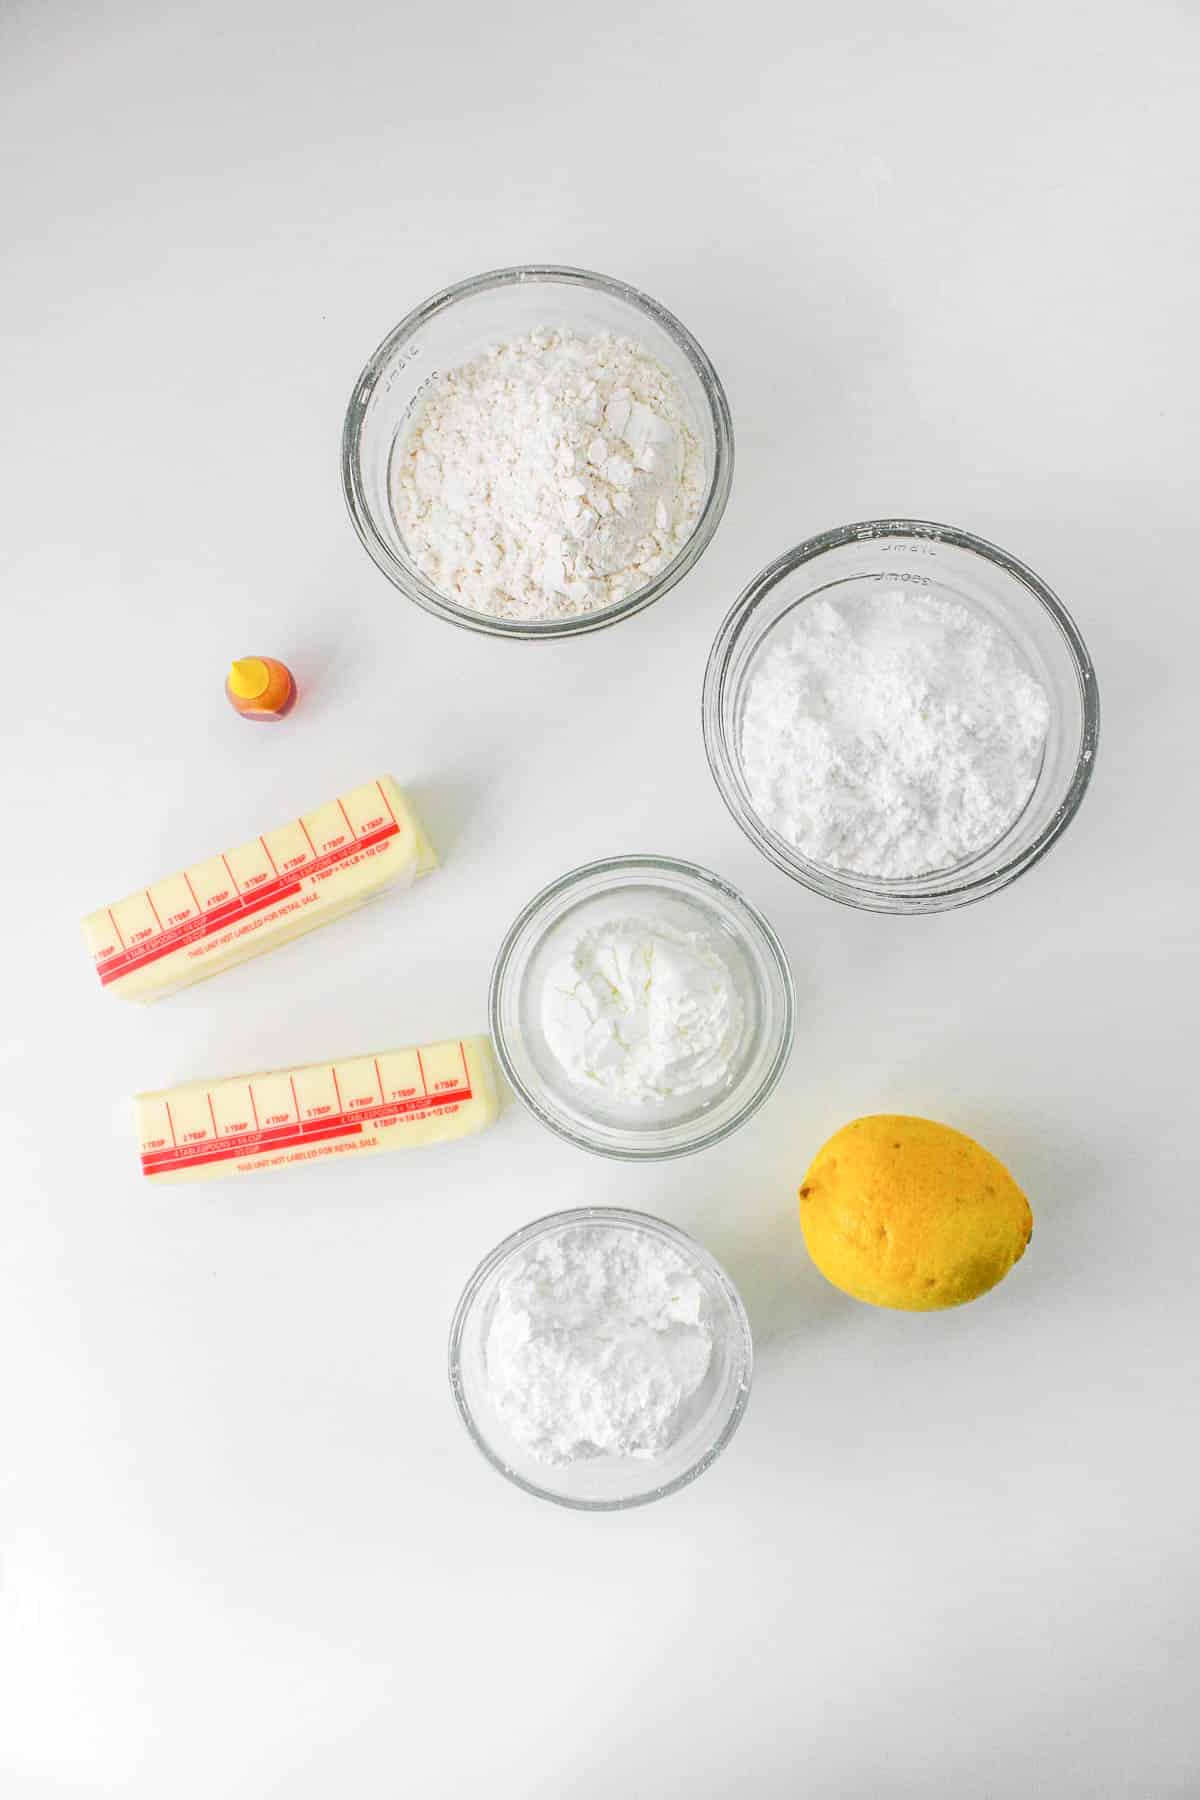 Several small bowls with ingredients for Lemon Shortbread Cookies - powdered sugar, flour, cornstarch, 2 stick of butter and lemon.